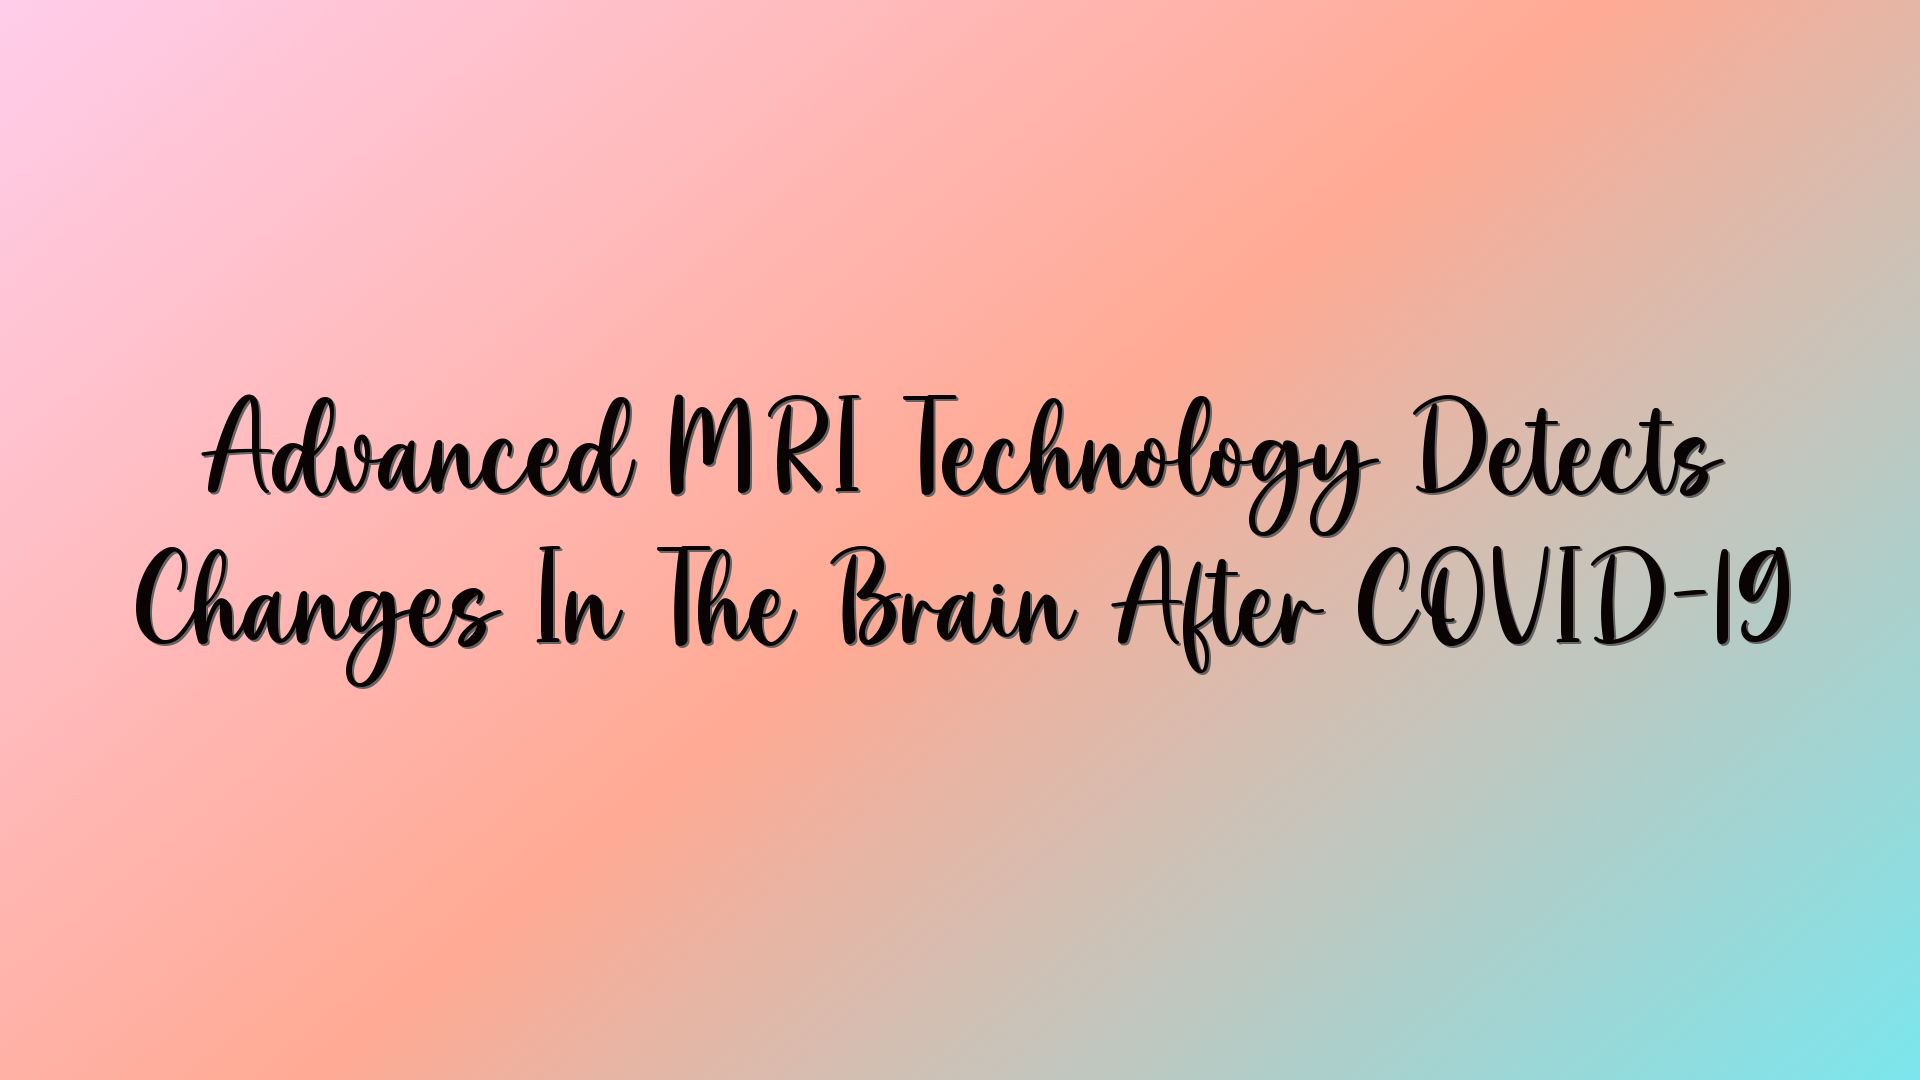 Advanced MRI Technology Detects Changes In The Brain After COVID-19